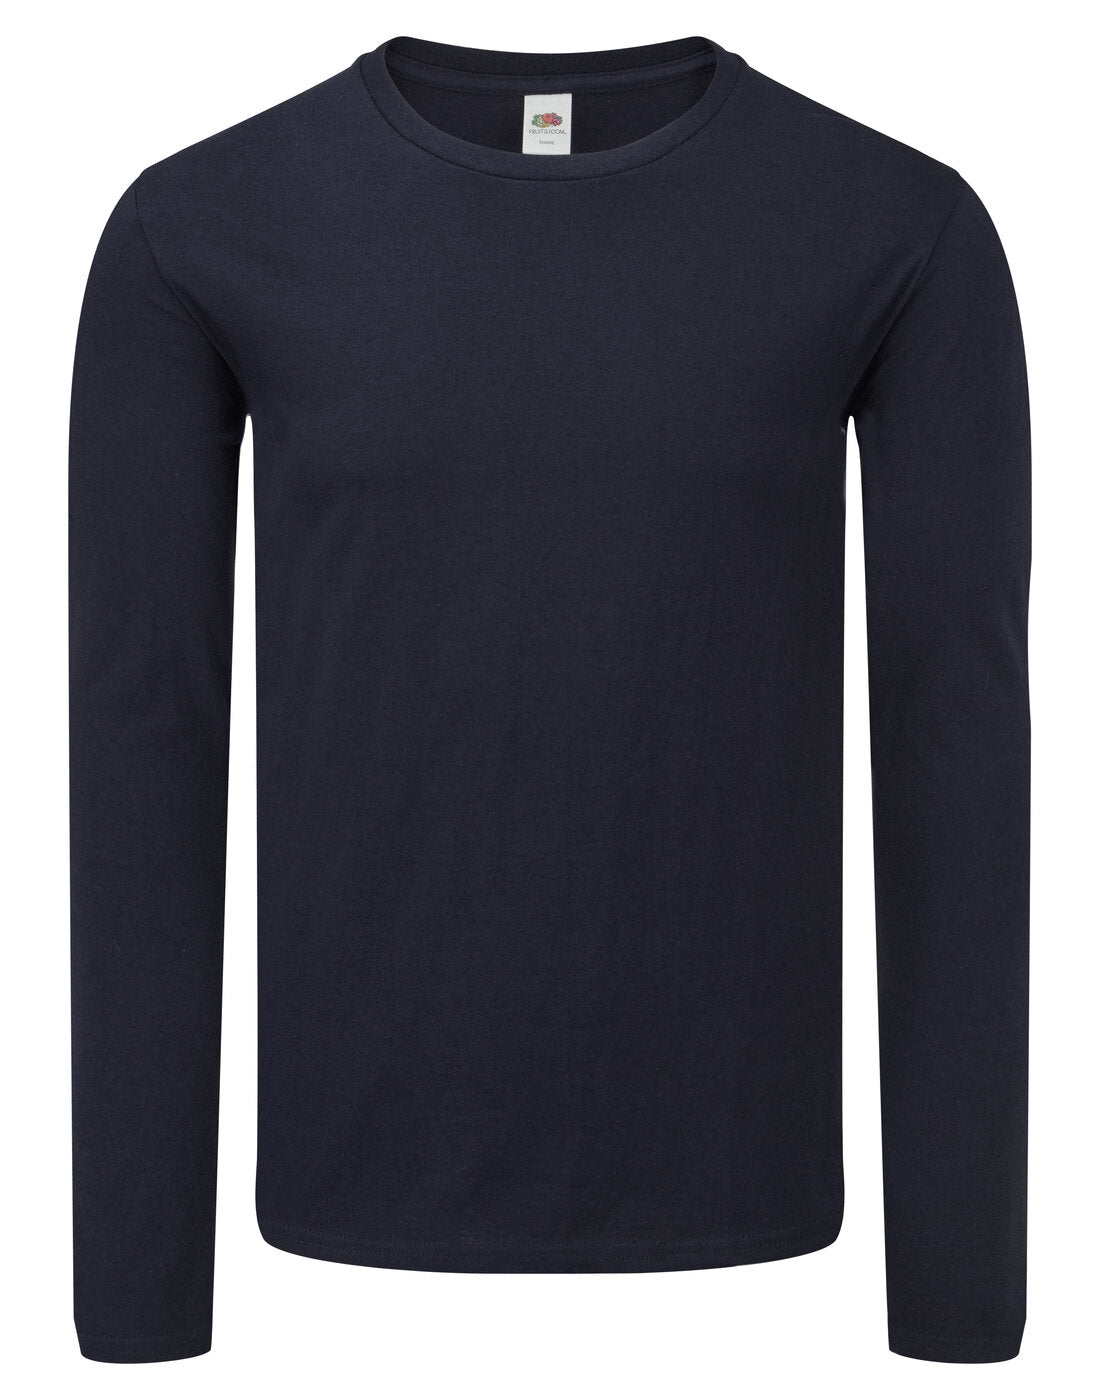 Fruit of the Loom Iconic 150 Classic Long Sleeve T - Deep Navy